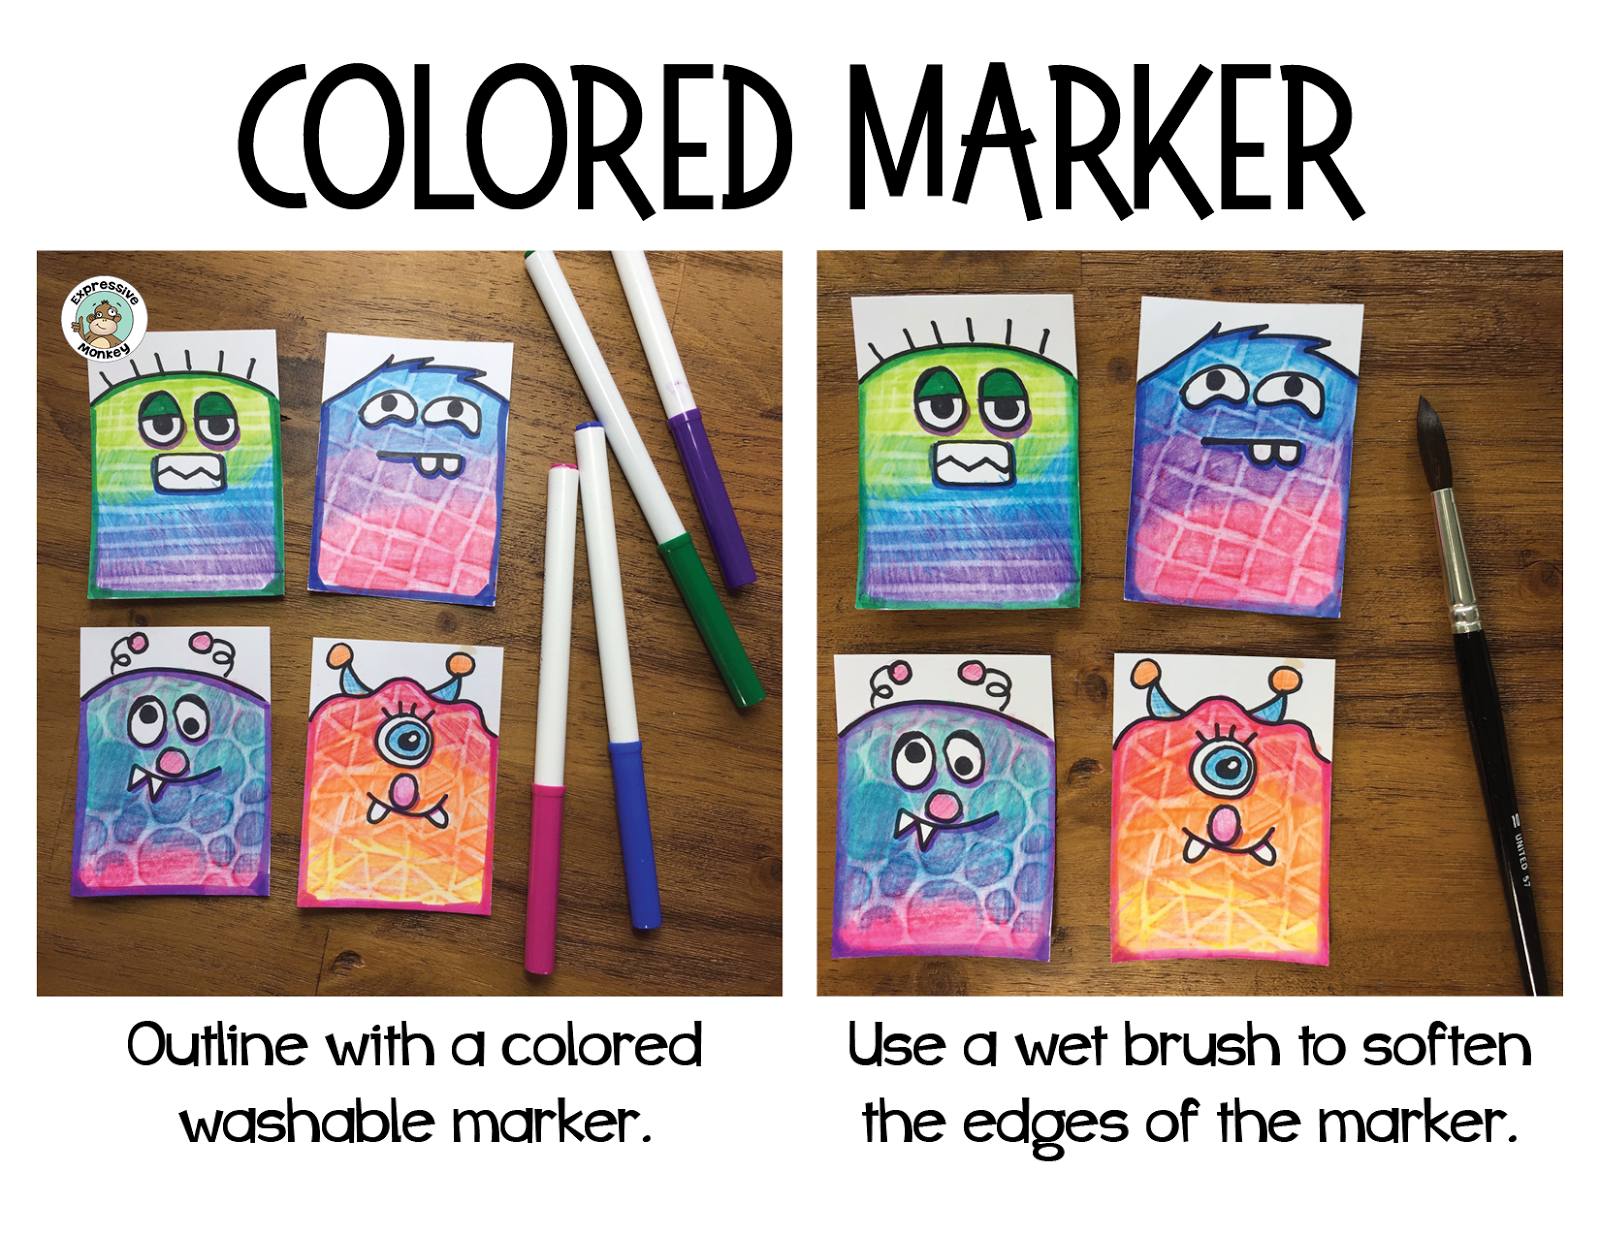 11 Artist Trading Cards for Kids ideas